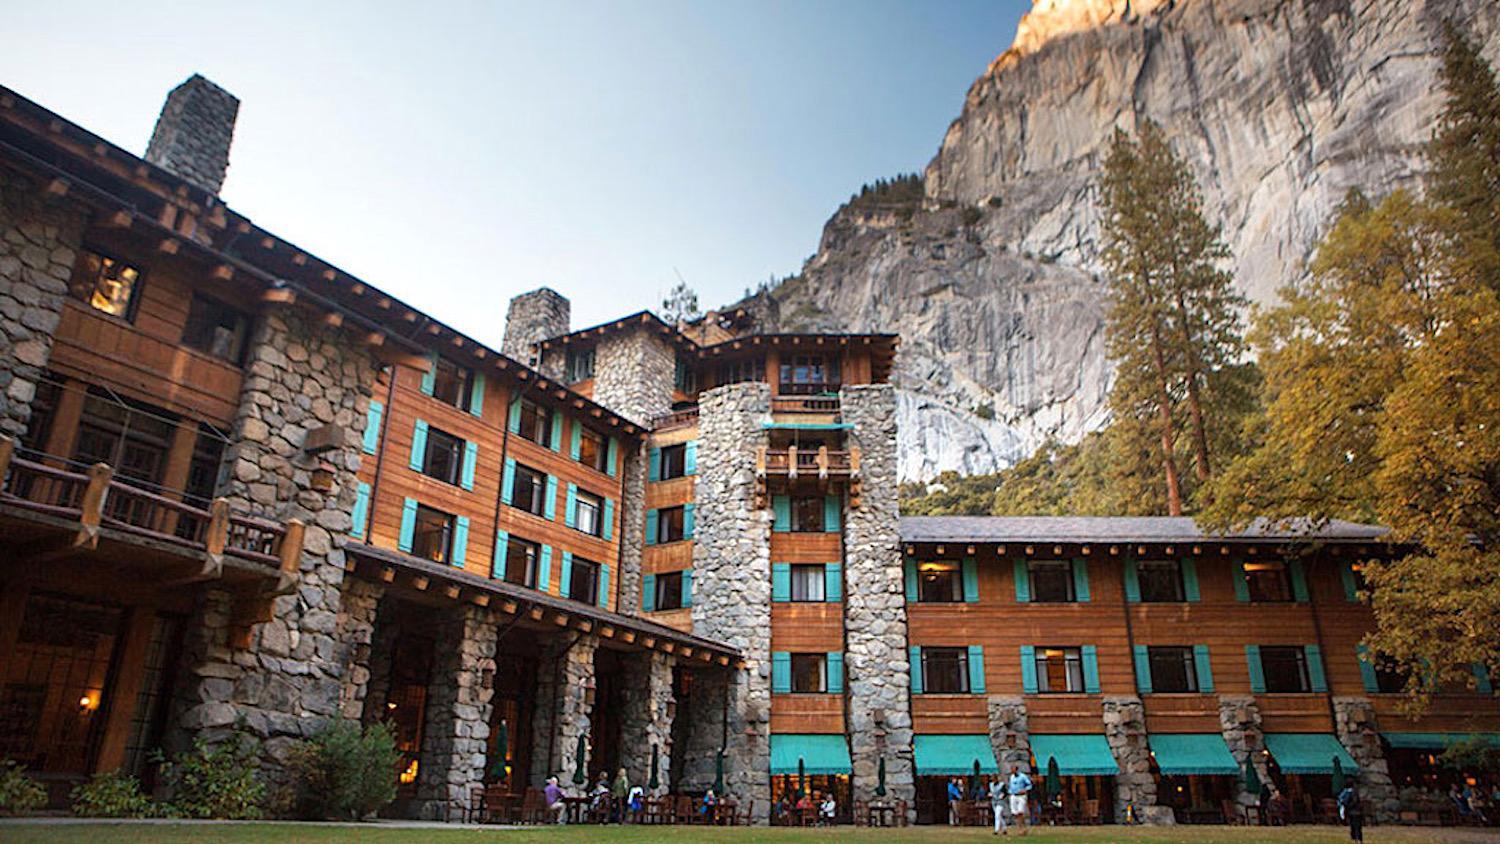 The Ahwahnee Hotel at Yosemite National Park is benefitting greatly from the Great American Outdoors Act/NPS file